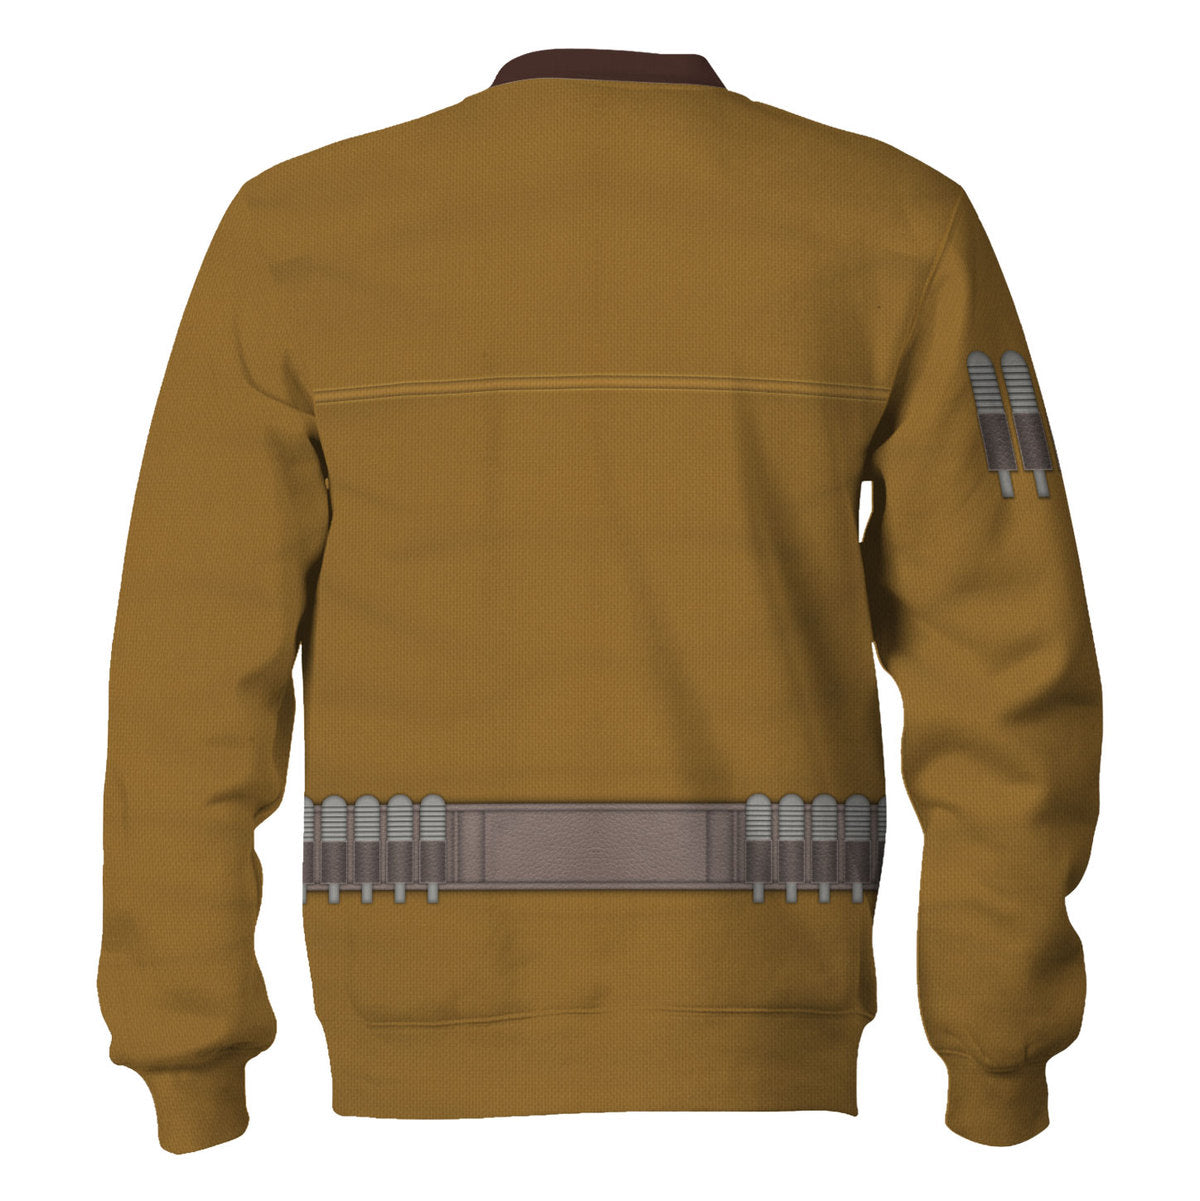 Star Wars Rose Tico Costume - Sweater - Ugly Christmas Sweater